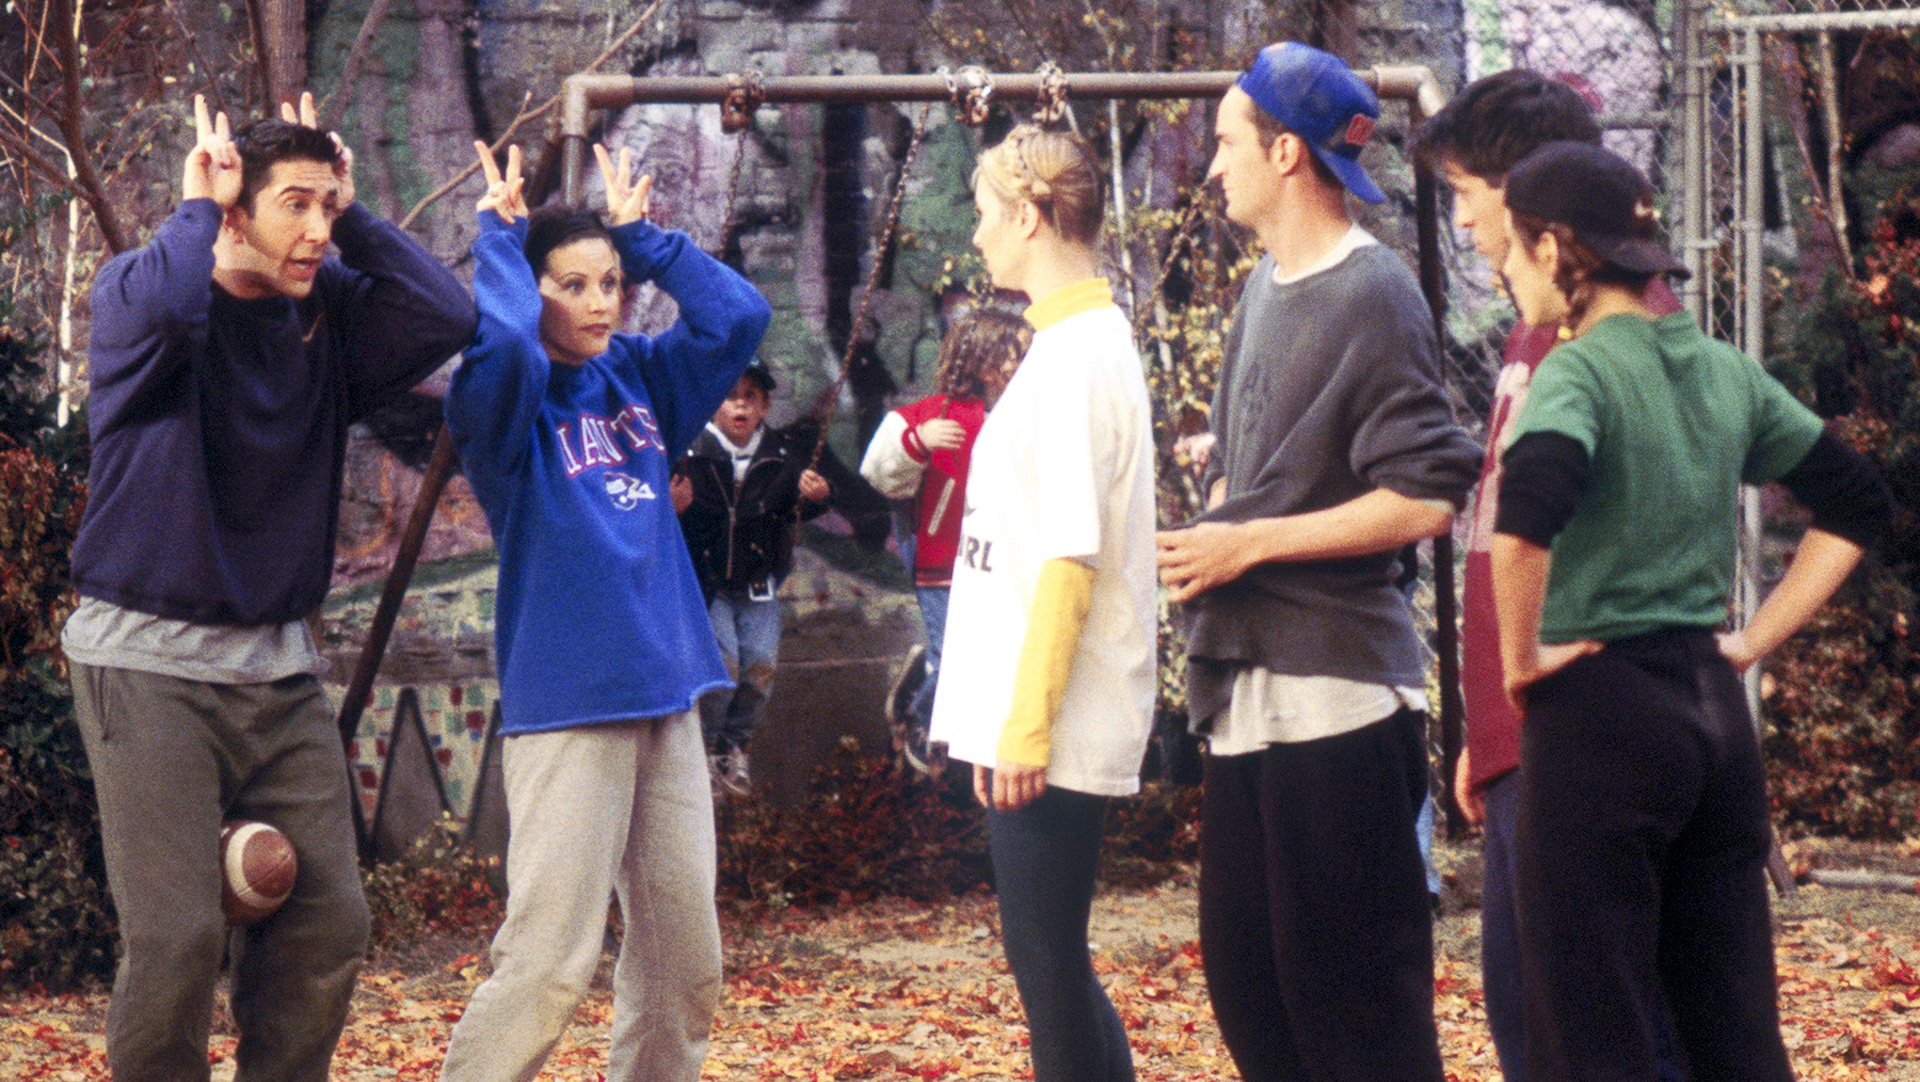 The cast play a game in the park